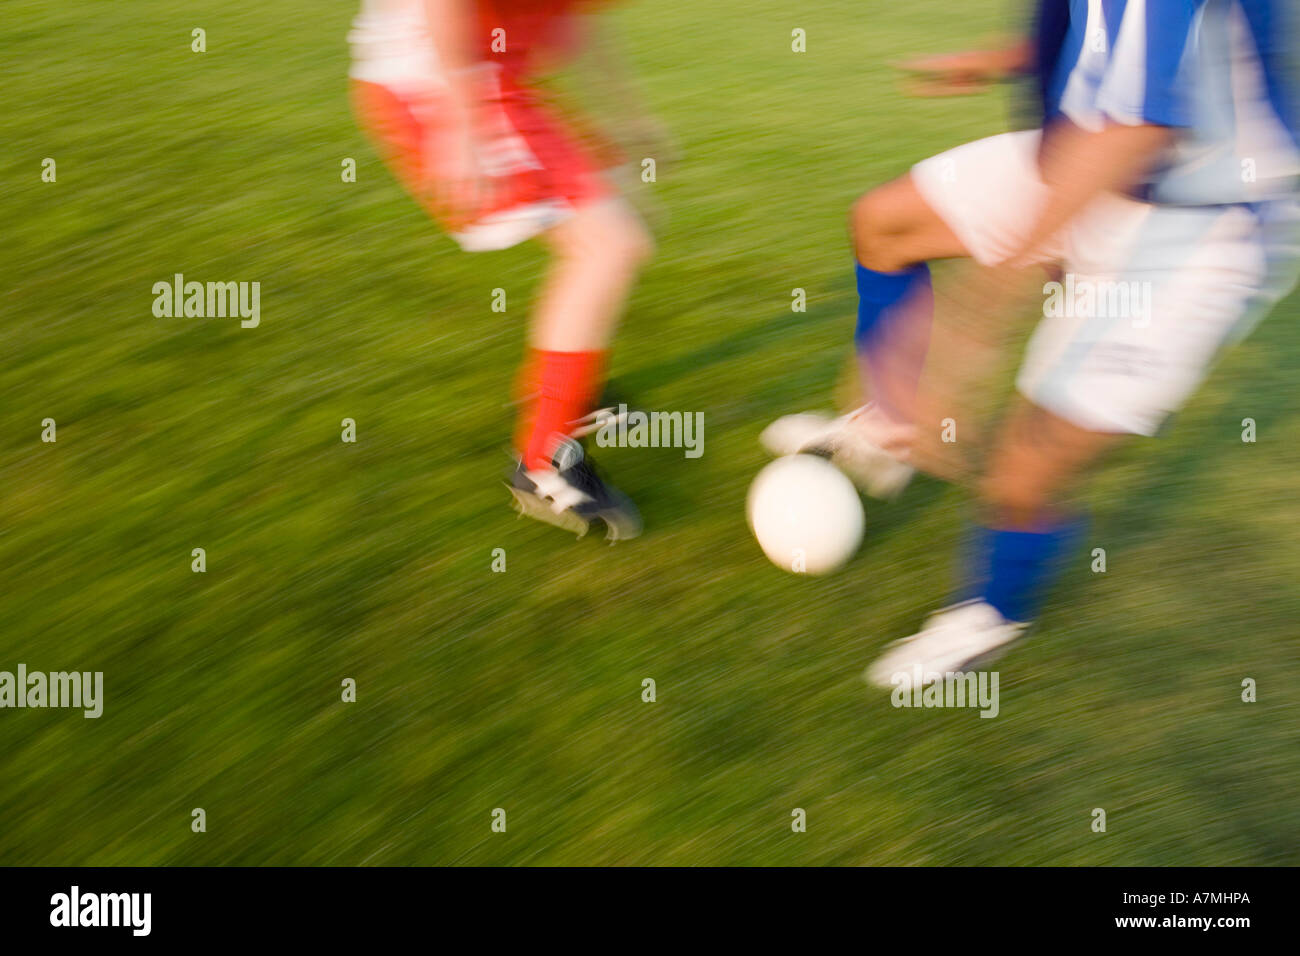 Two soccer players playing soccer Stock Photo